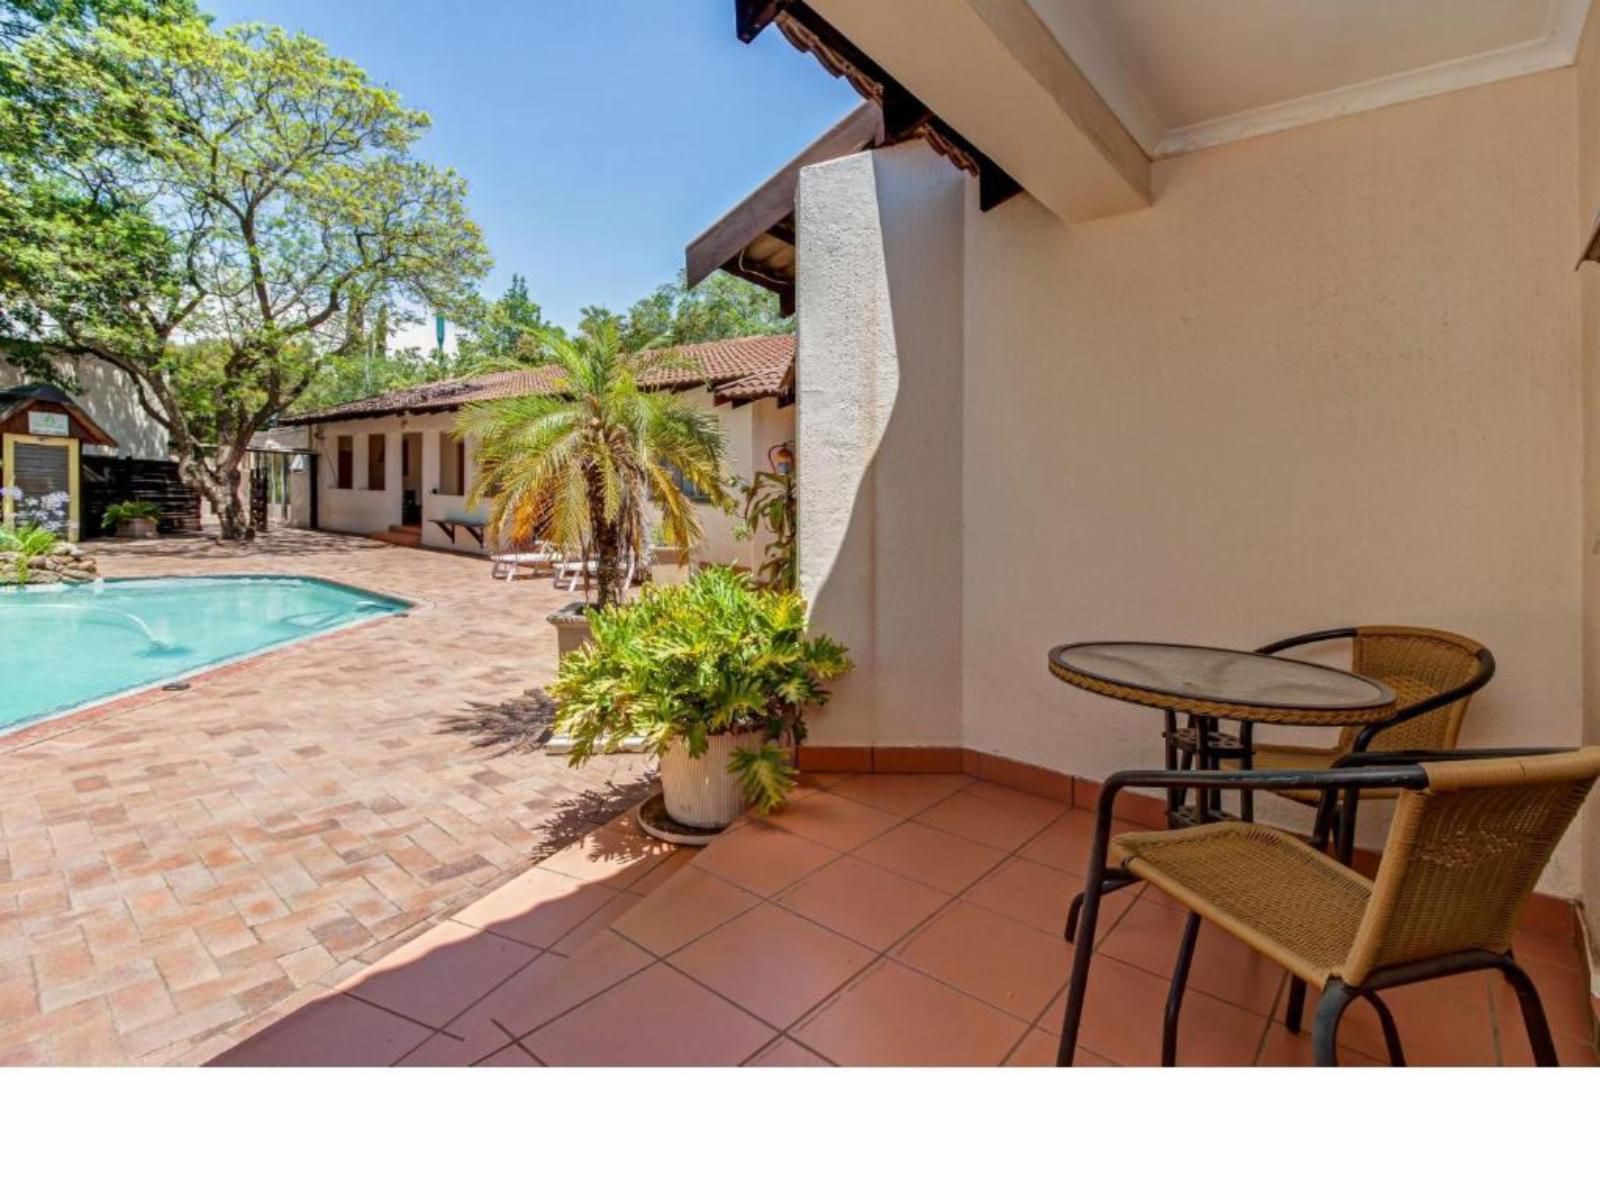 Dalberry Guest House Fourways Johannesburg Gauteng South Africa Palm Tree, Plant, Nature, Wood, Swimming Pool